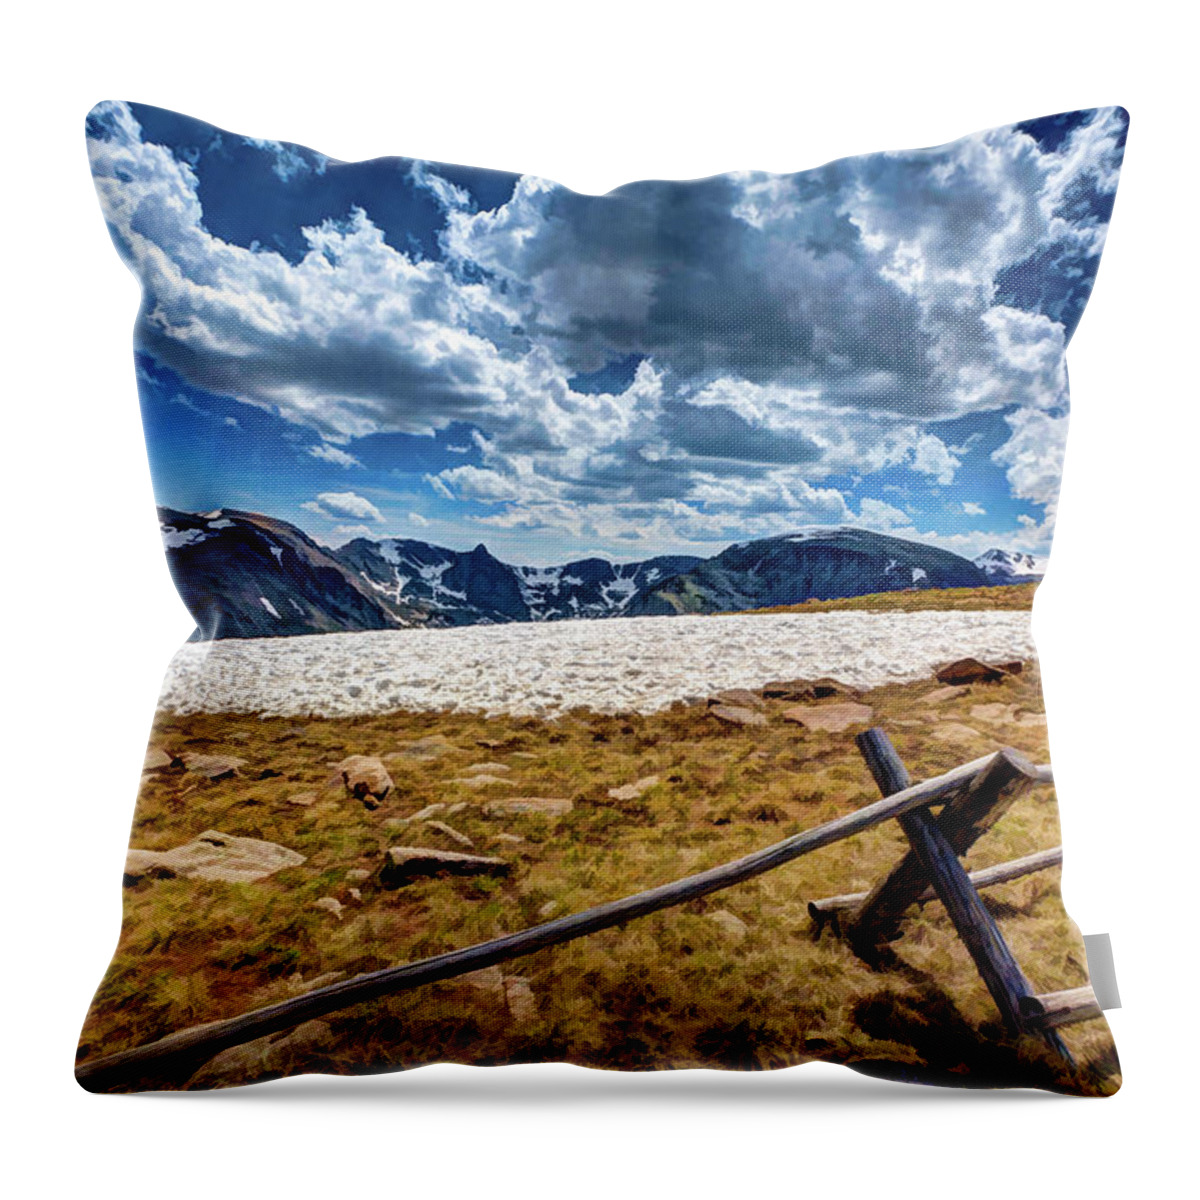 Colorado Throw Pillow featuring the photograph Lingering Snow by David Thompsen